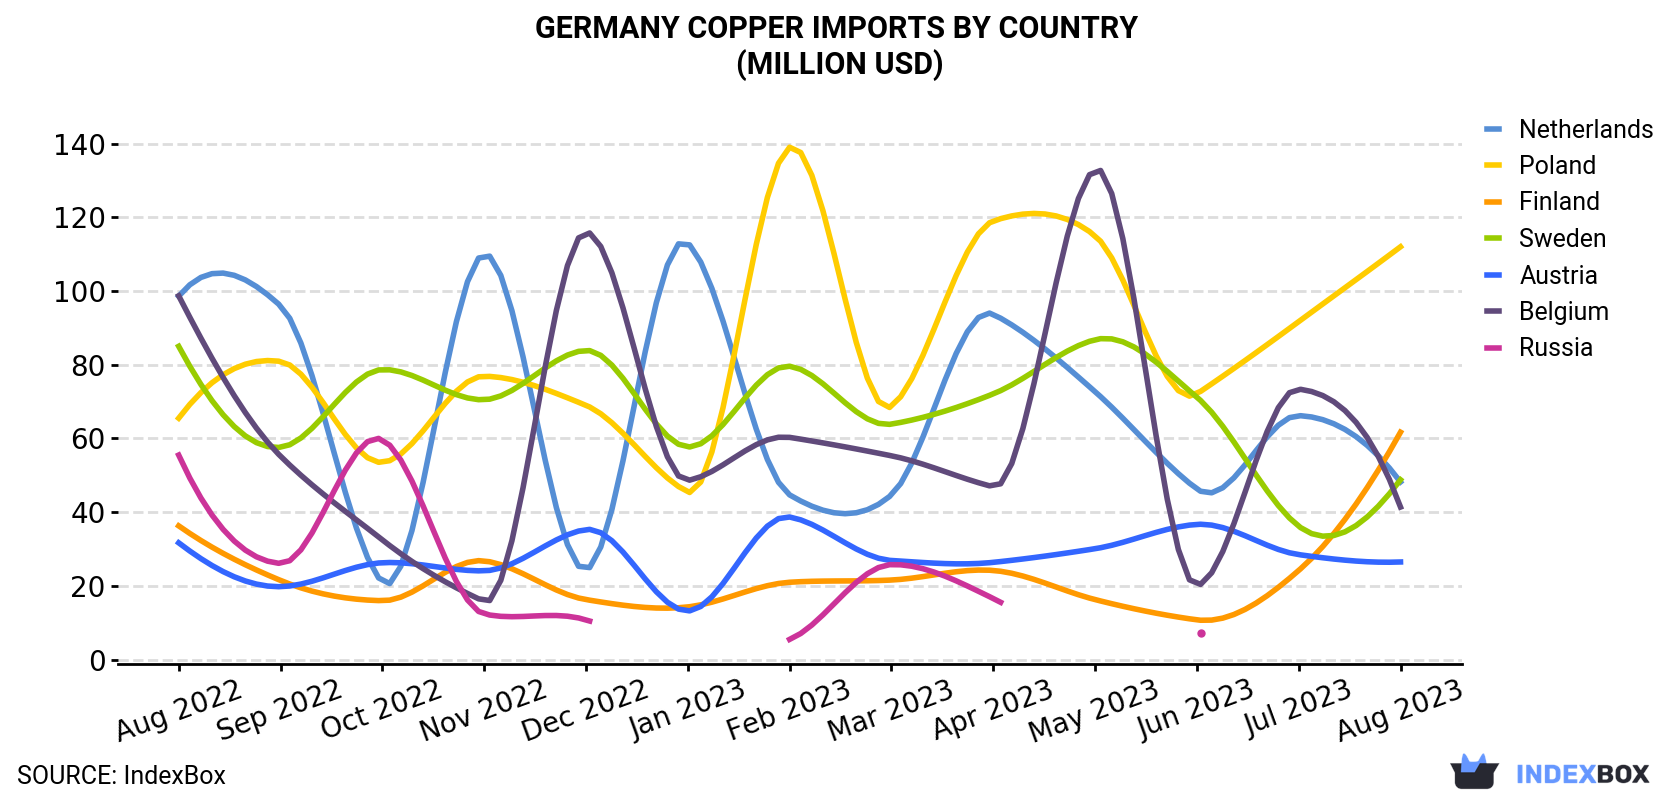 Germany Copper Imports By Country (Million USD)